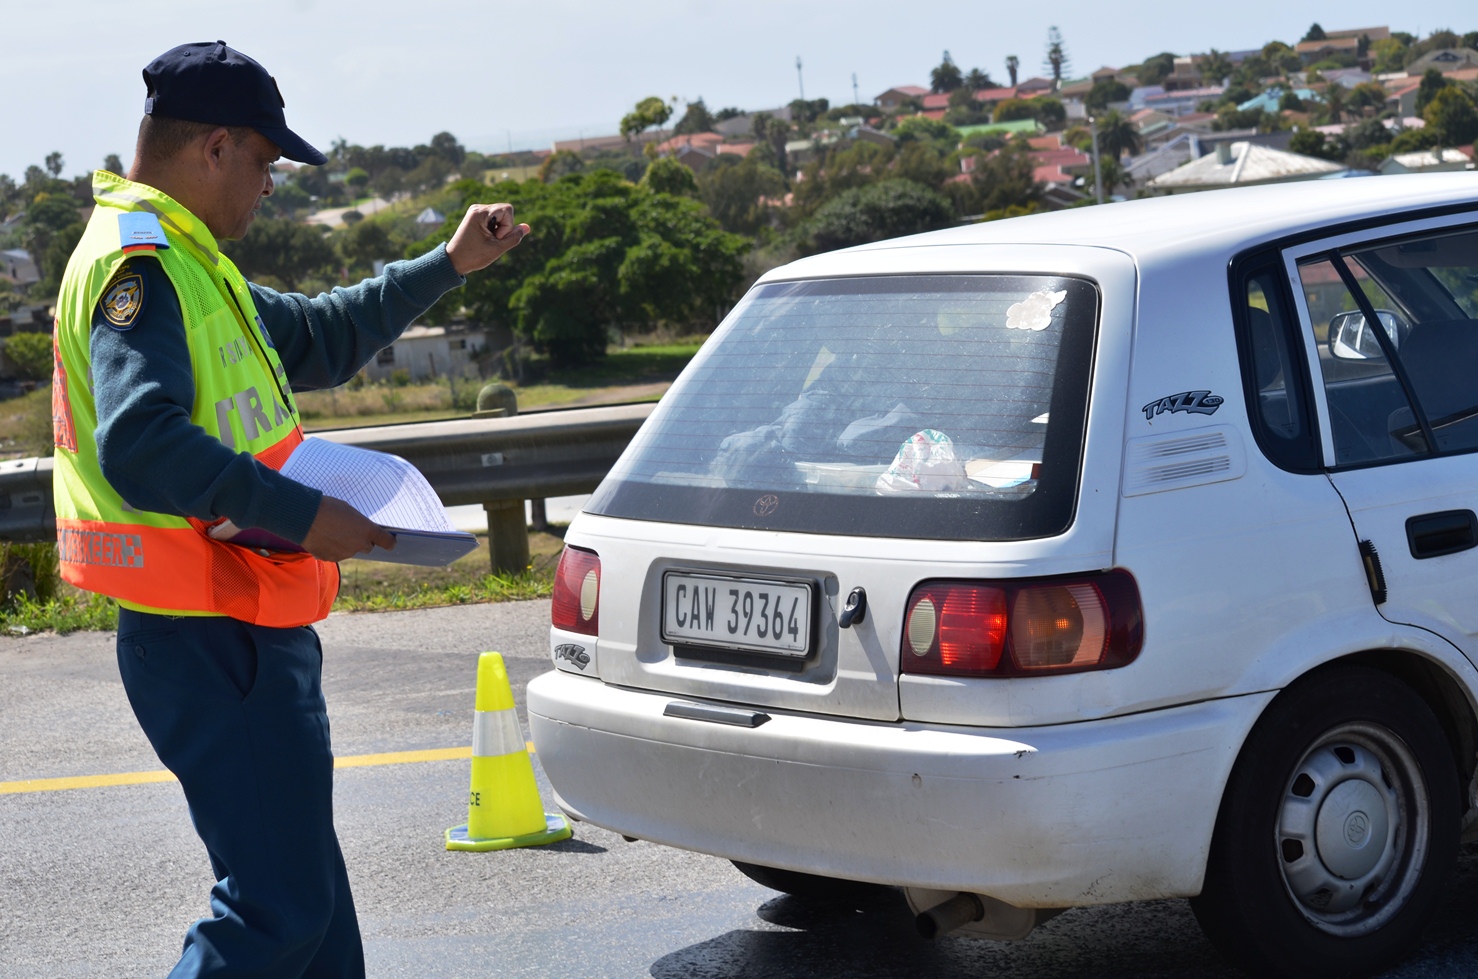 Traffic Officers have been working around the clock to help create safer, booze-free roads.